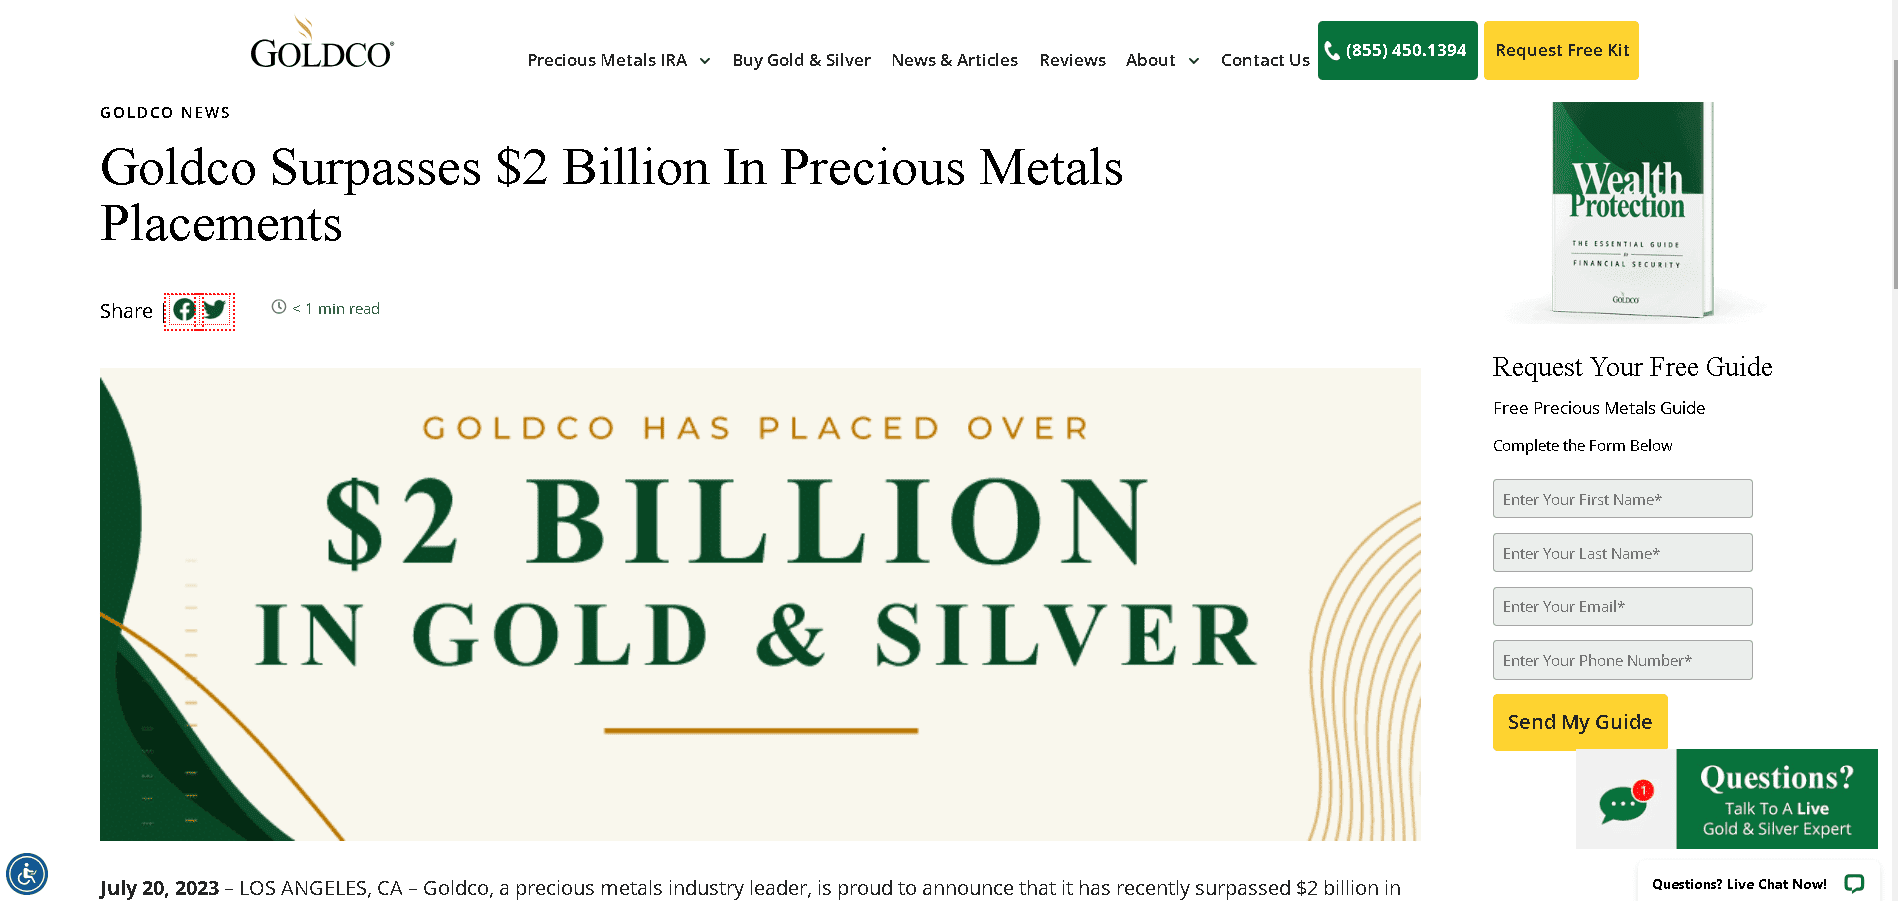 Goldco have sold over 2 billion worth of precious metals